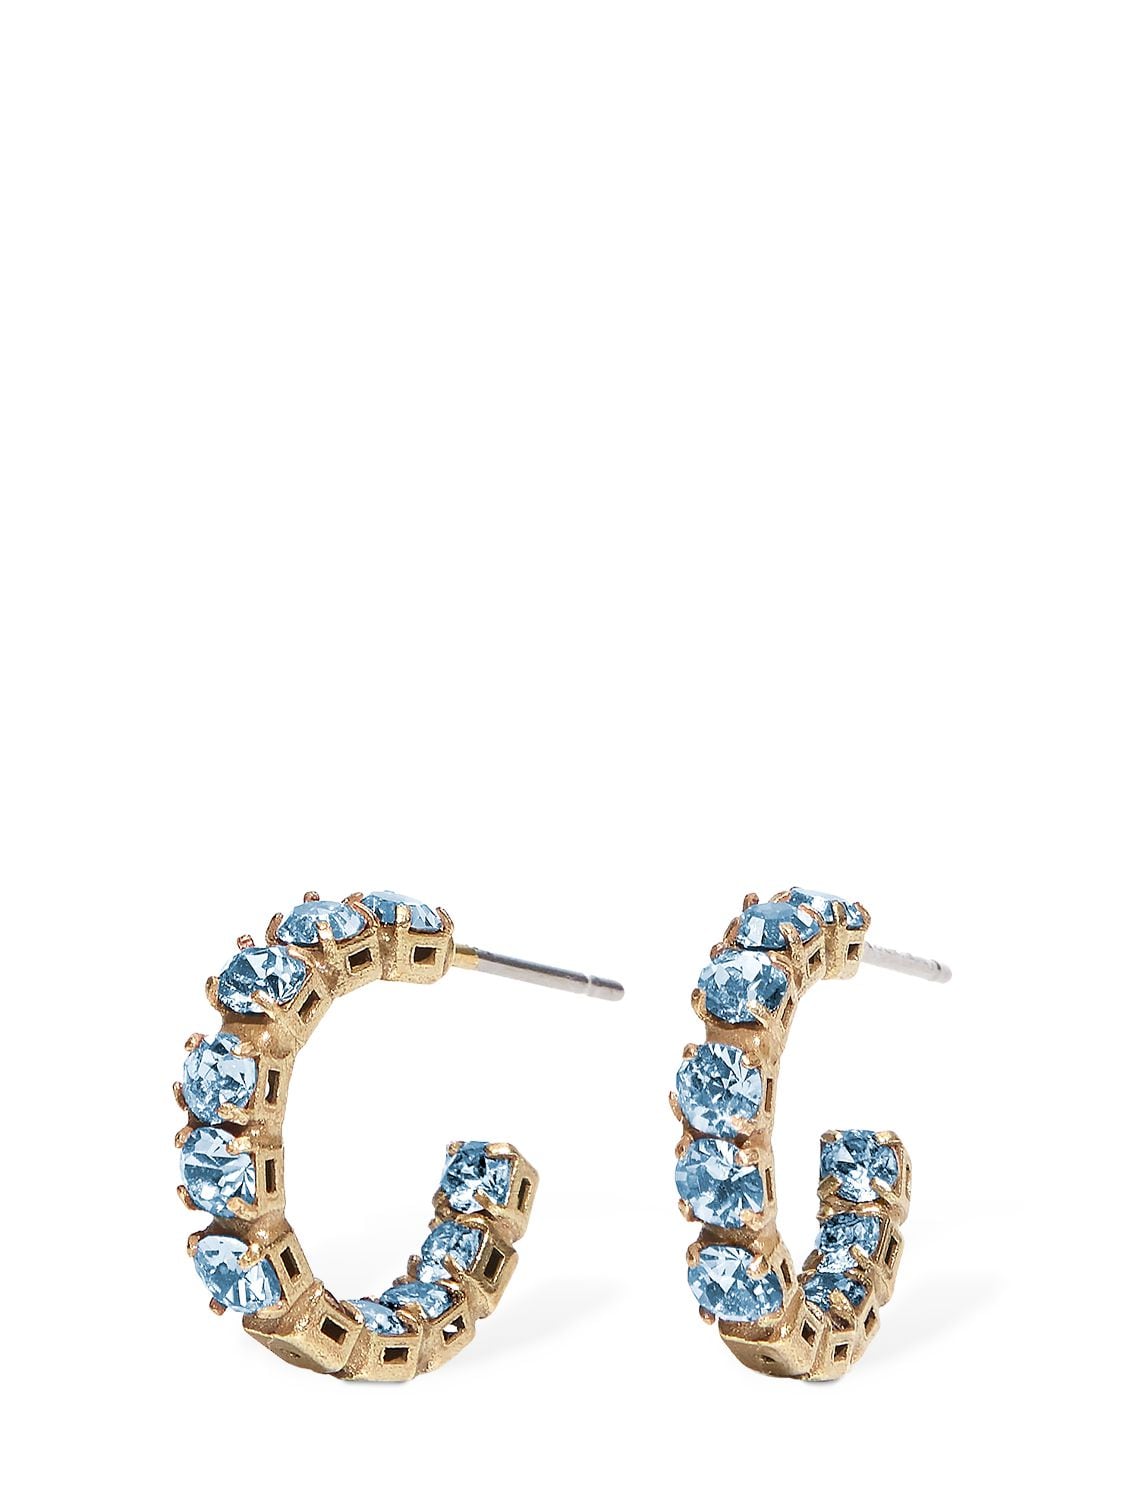 Yun Yun Sun Lvr Exclusive Tinkers Crystal Earrings In Gold,blue